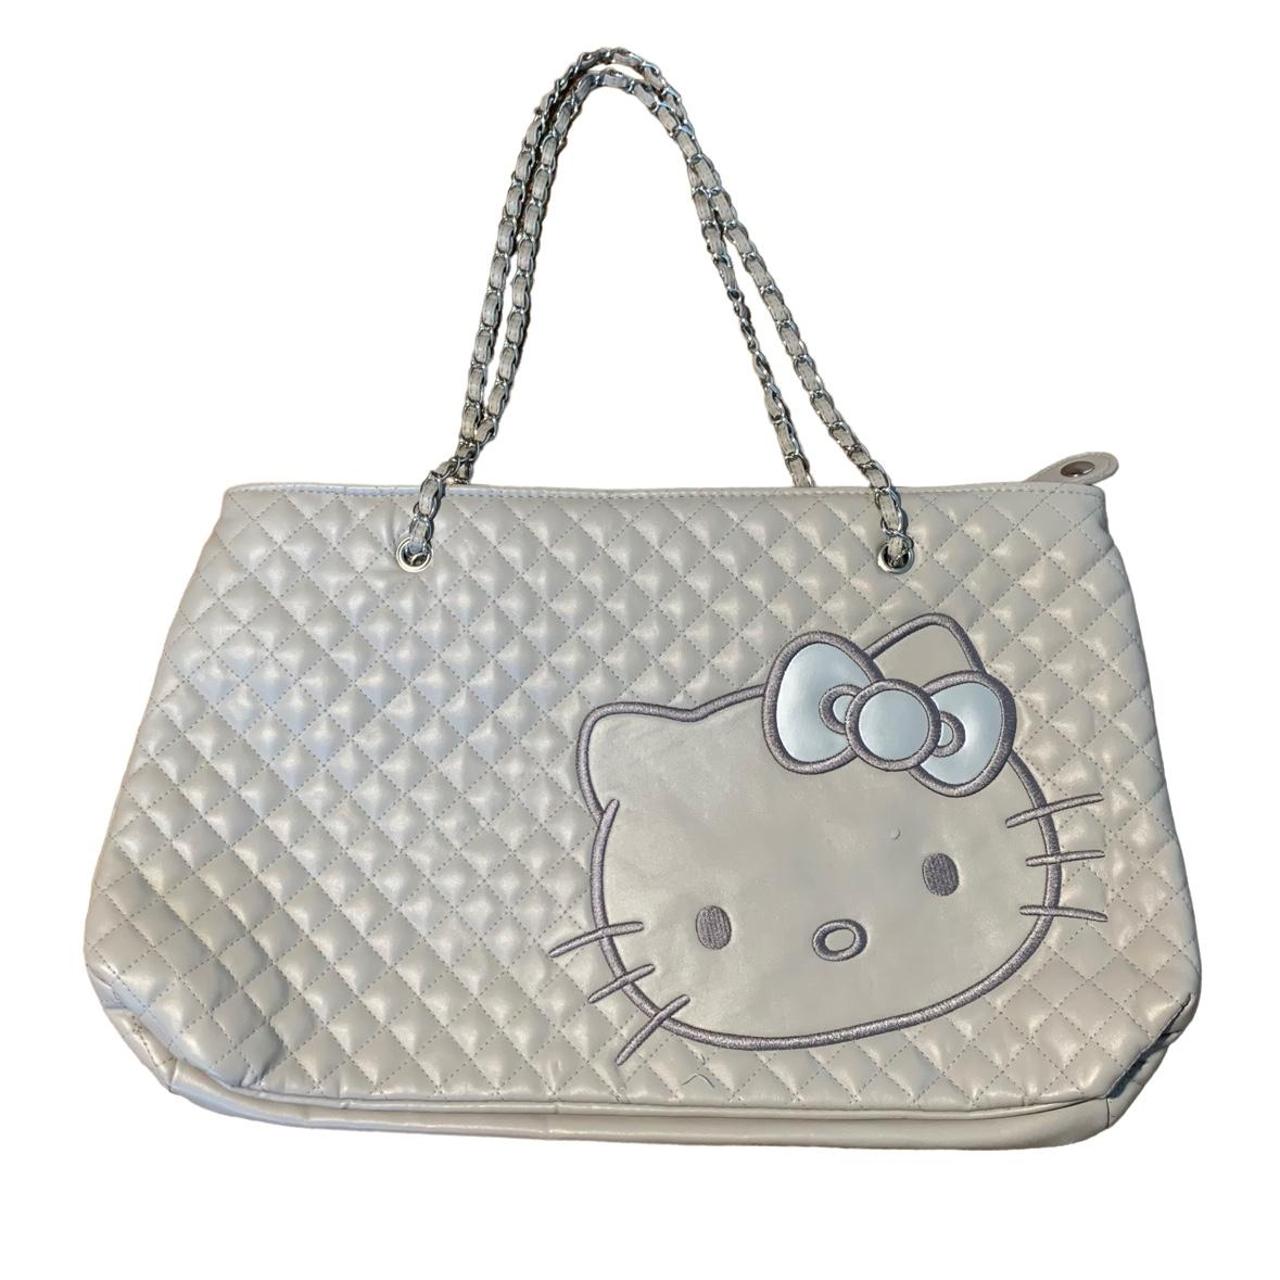 Hello Kitty, Bags, Hello Kitty Quilted Shoulder Bag